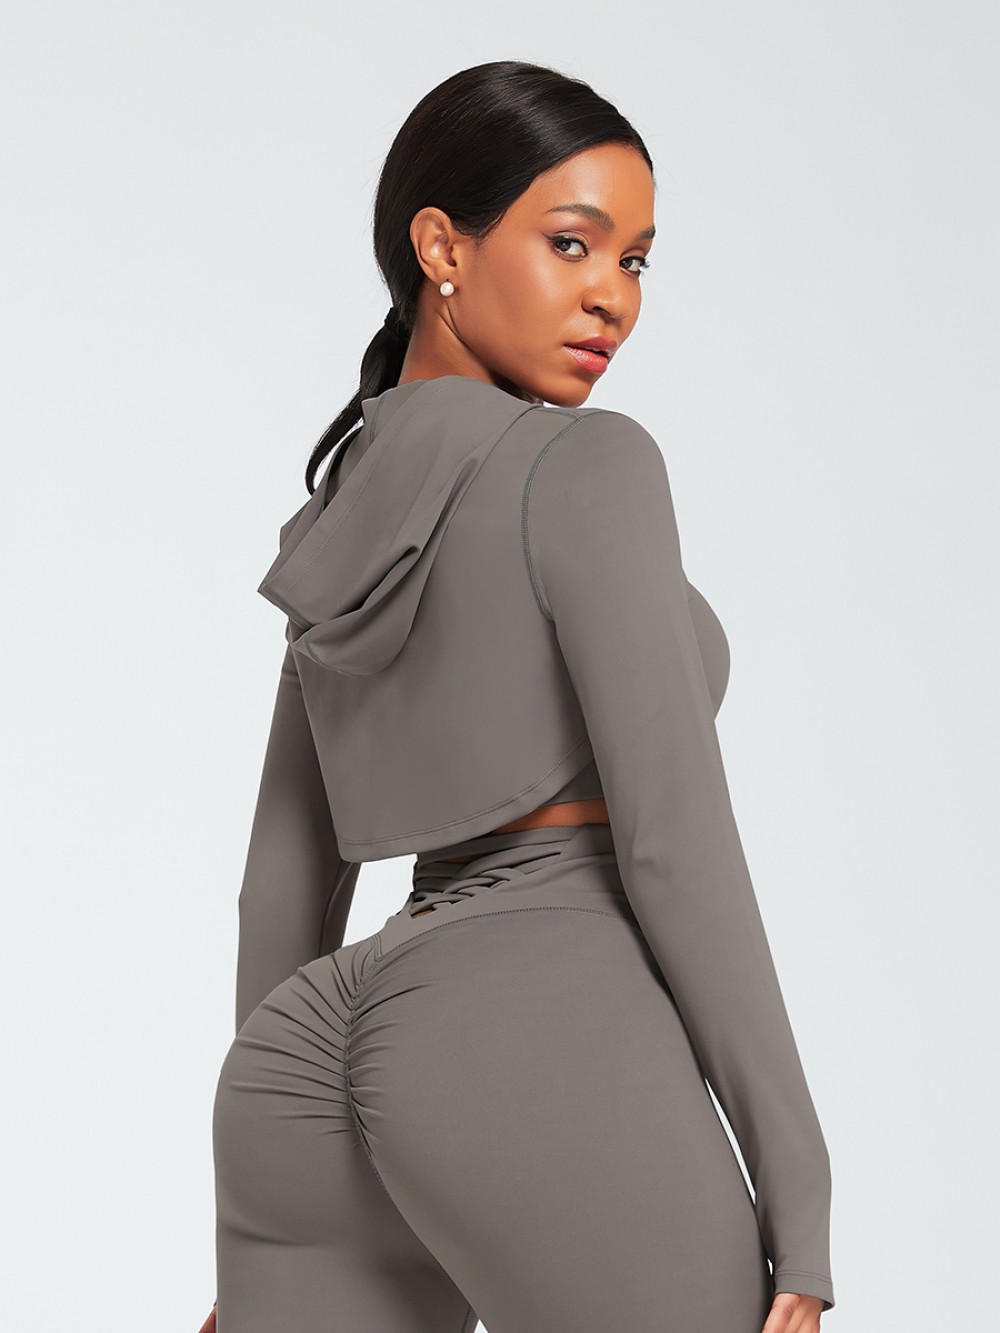 Gray Short Front Sports Top Long Sleeve Elastic Material